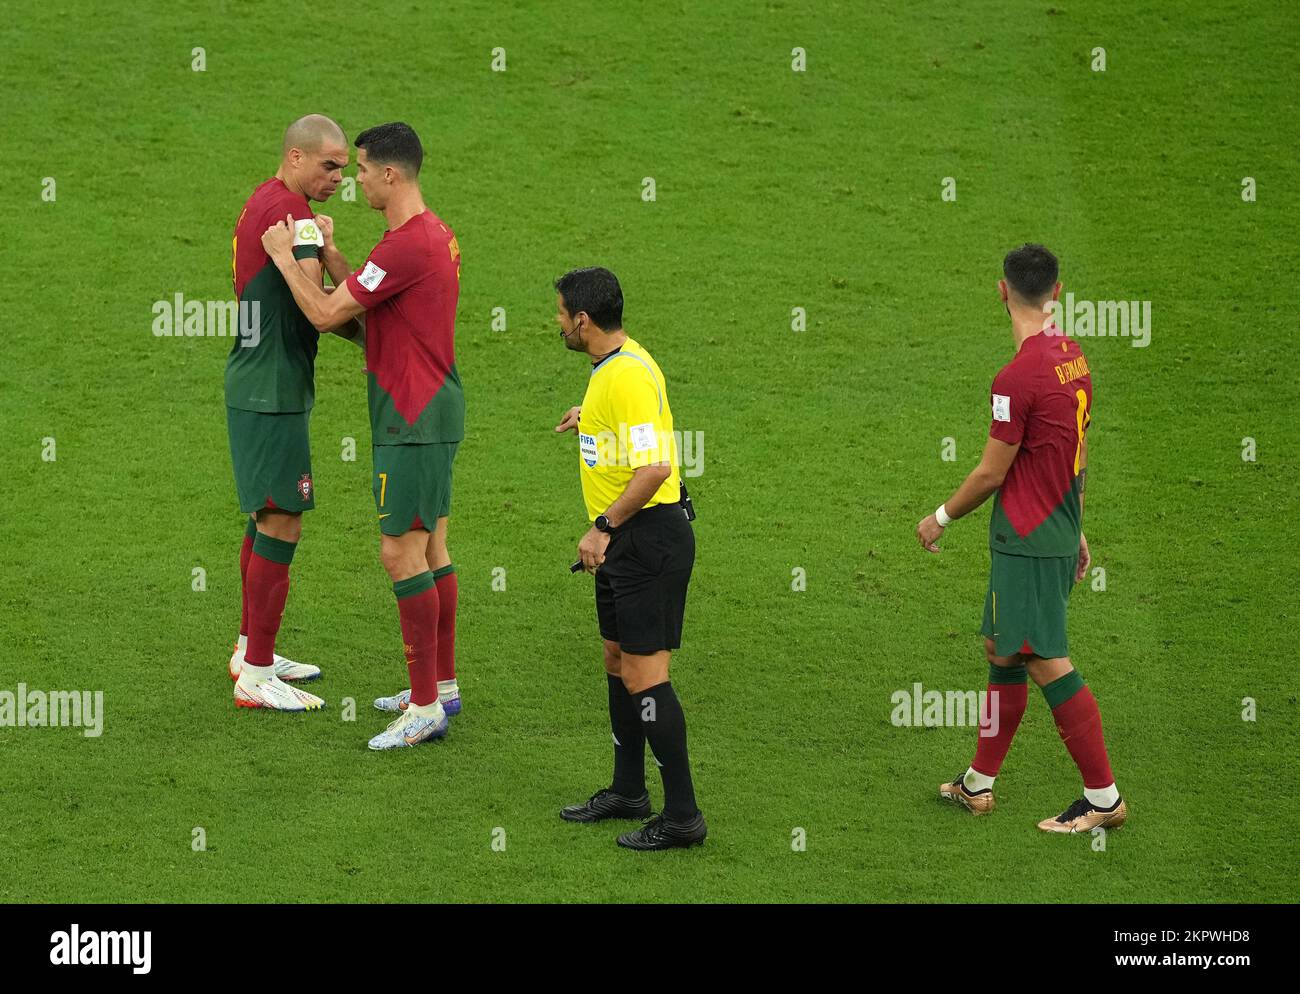 Portugal's Cristiano Ronaldo gives the captain's arm-band to team-mate Pepe after being substituted during the FIFA World Cup Group H match at the Lusail Stadium in Lusail, Qatar. Picture date: Monday November 28, 2022. Stock Photo